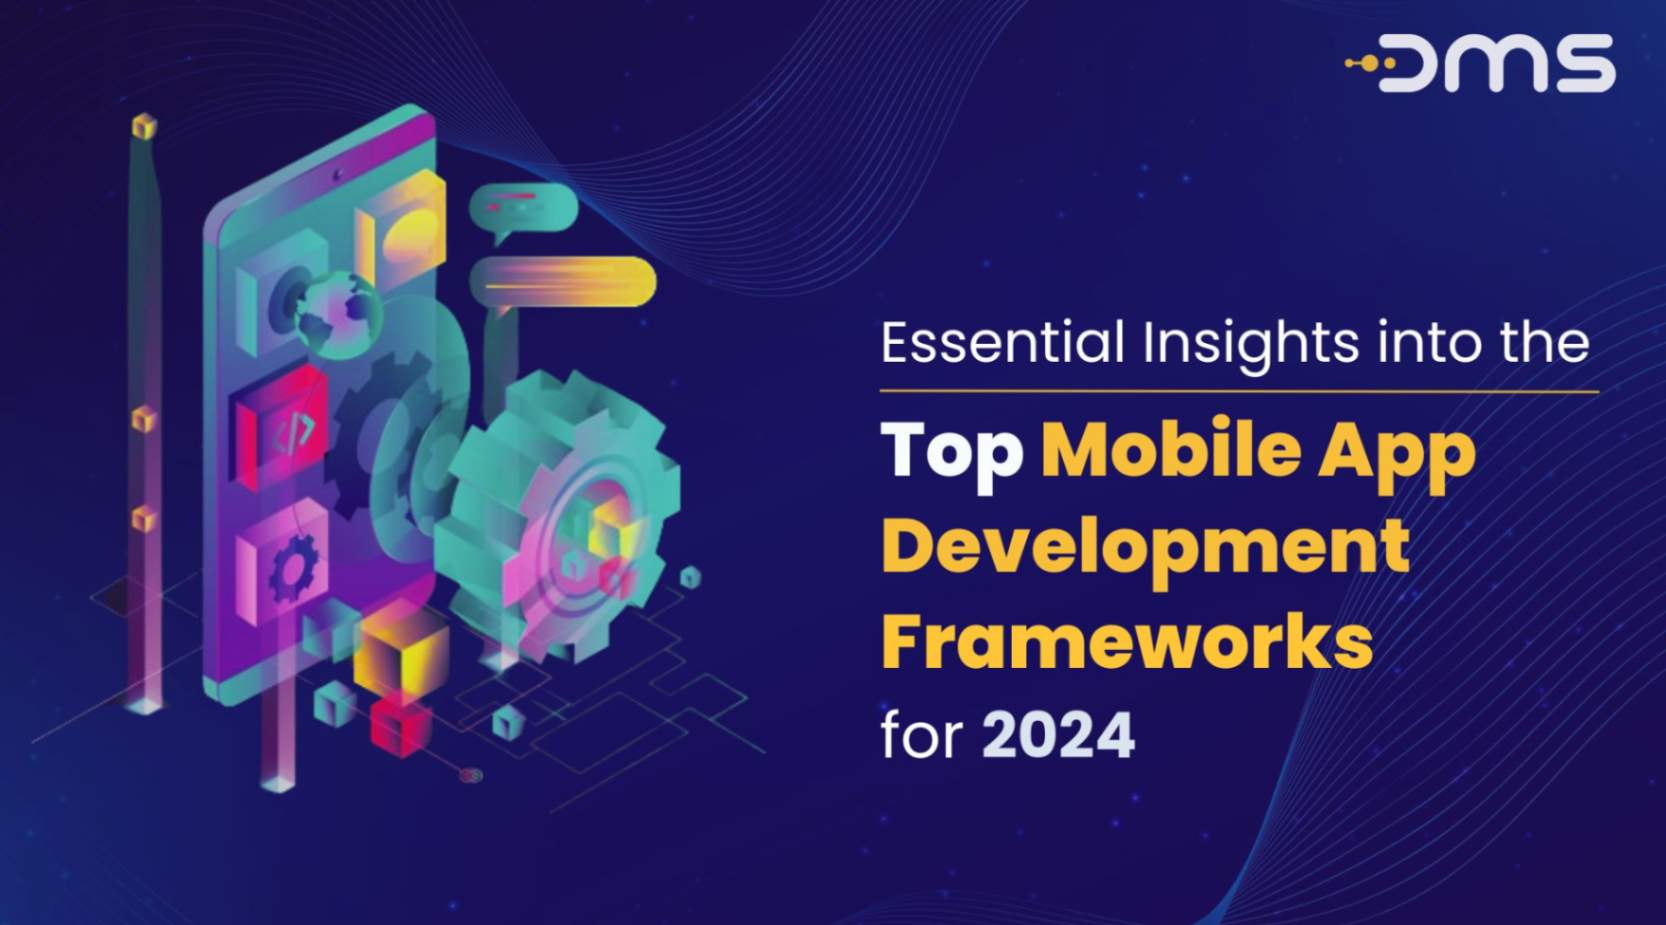 Essential Insights into the Top Mobile App Development Frameworks for 2024